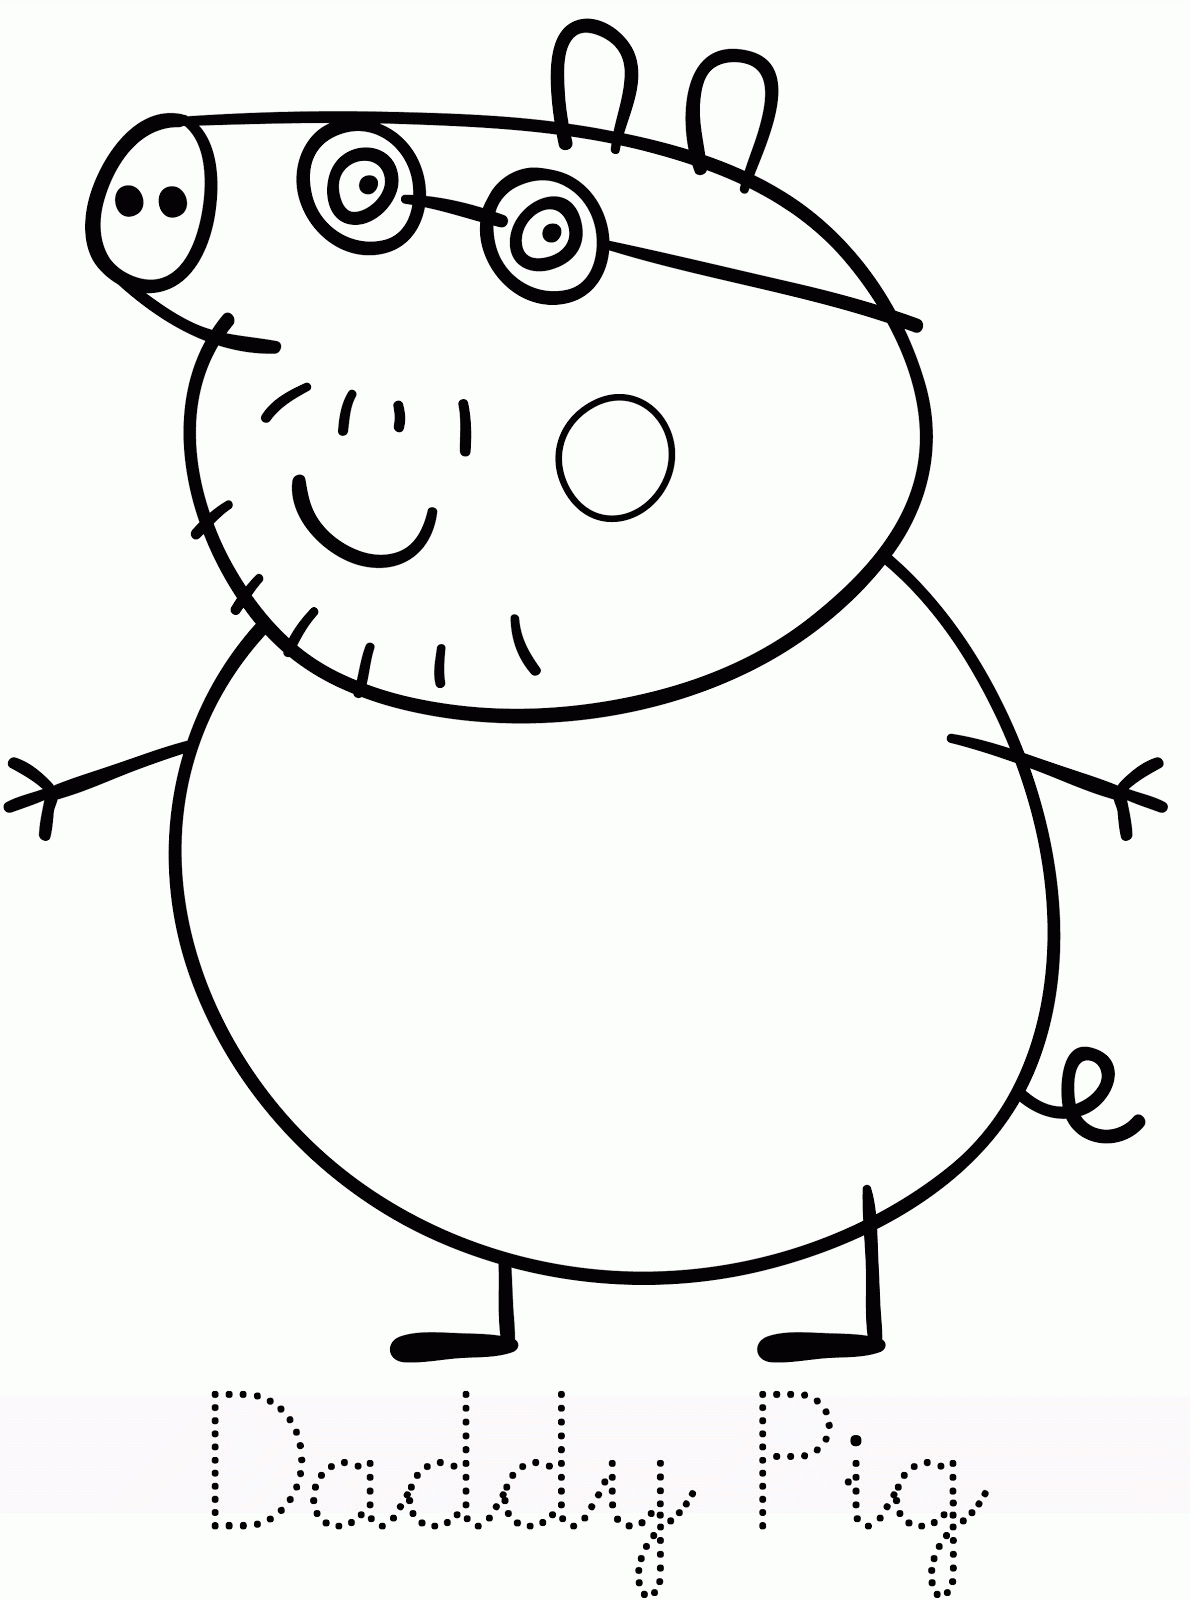 Peppa Pig Daddy Pig Coloring Pages - Coloring Home